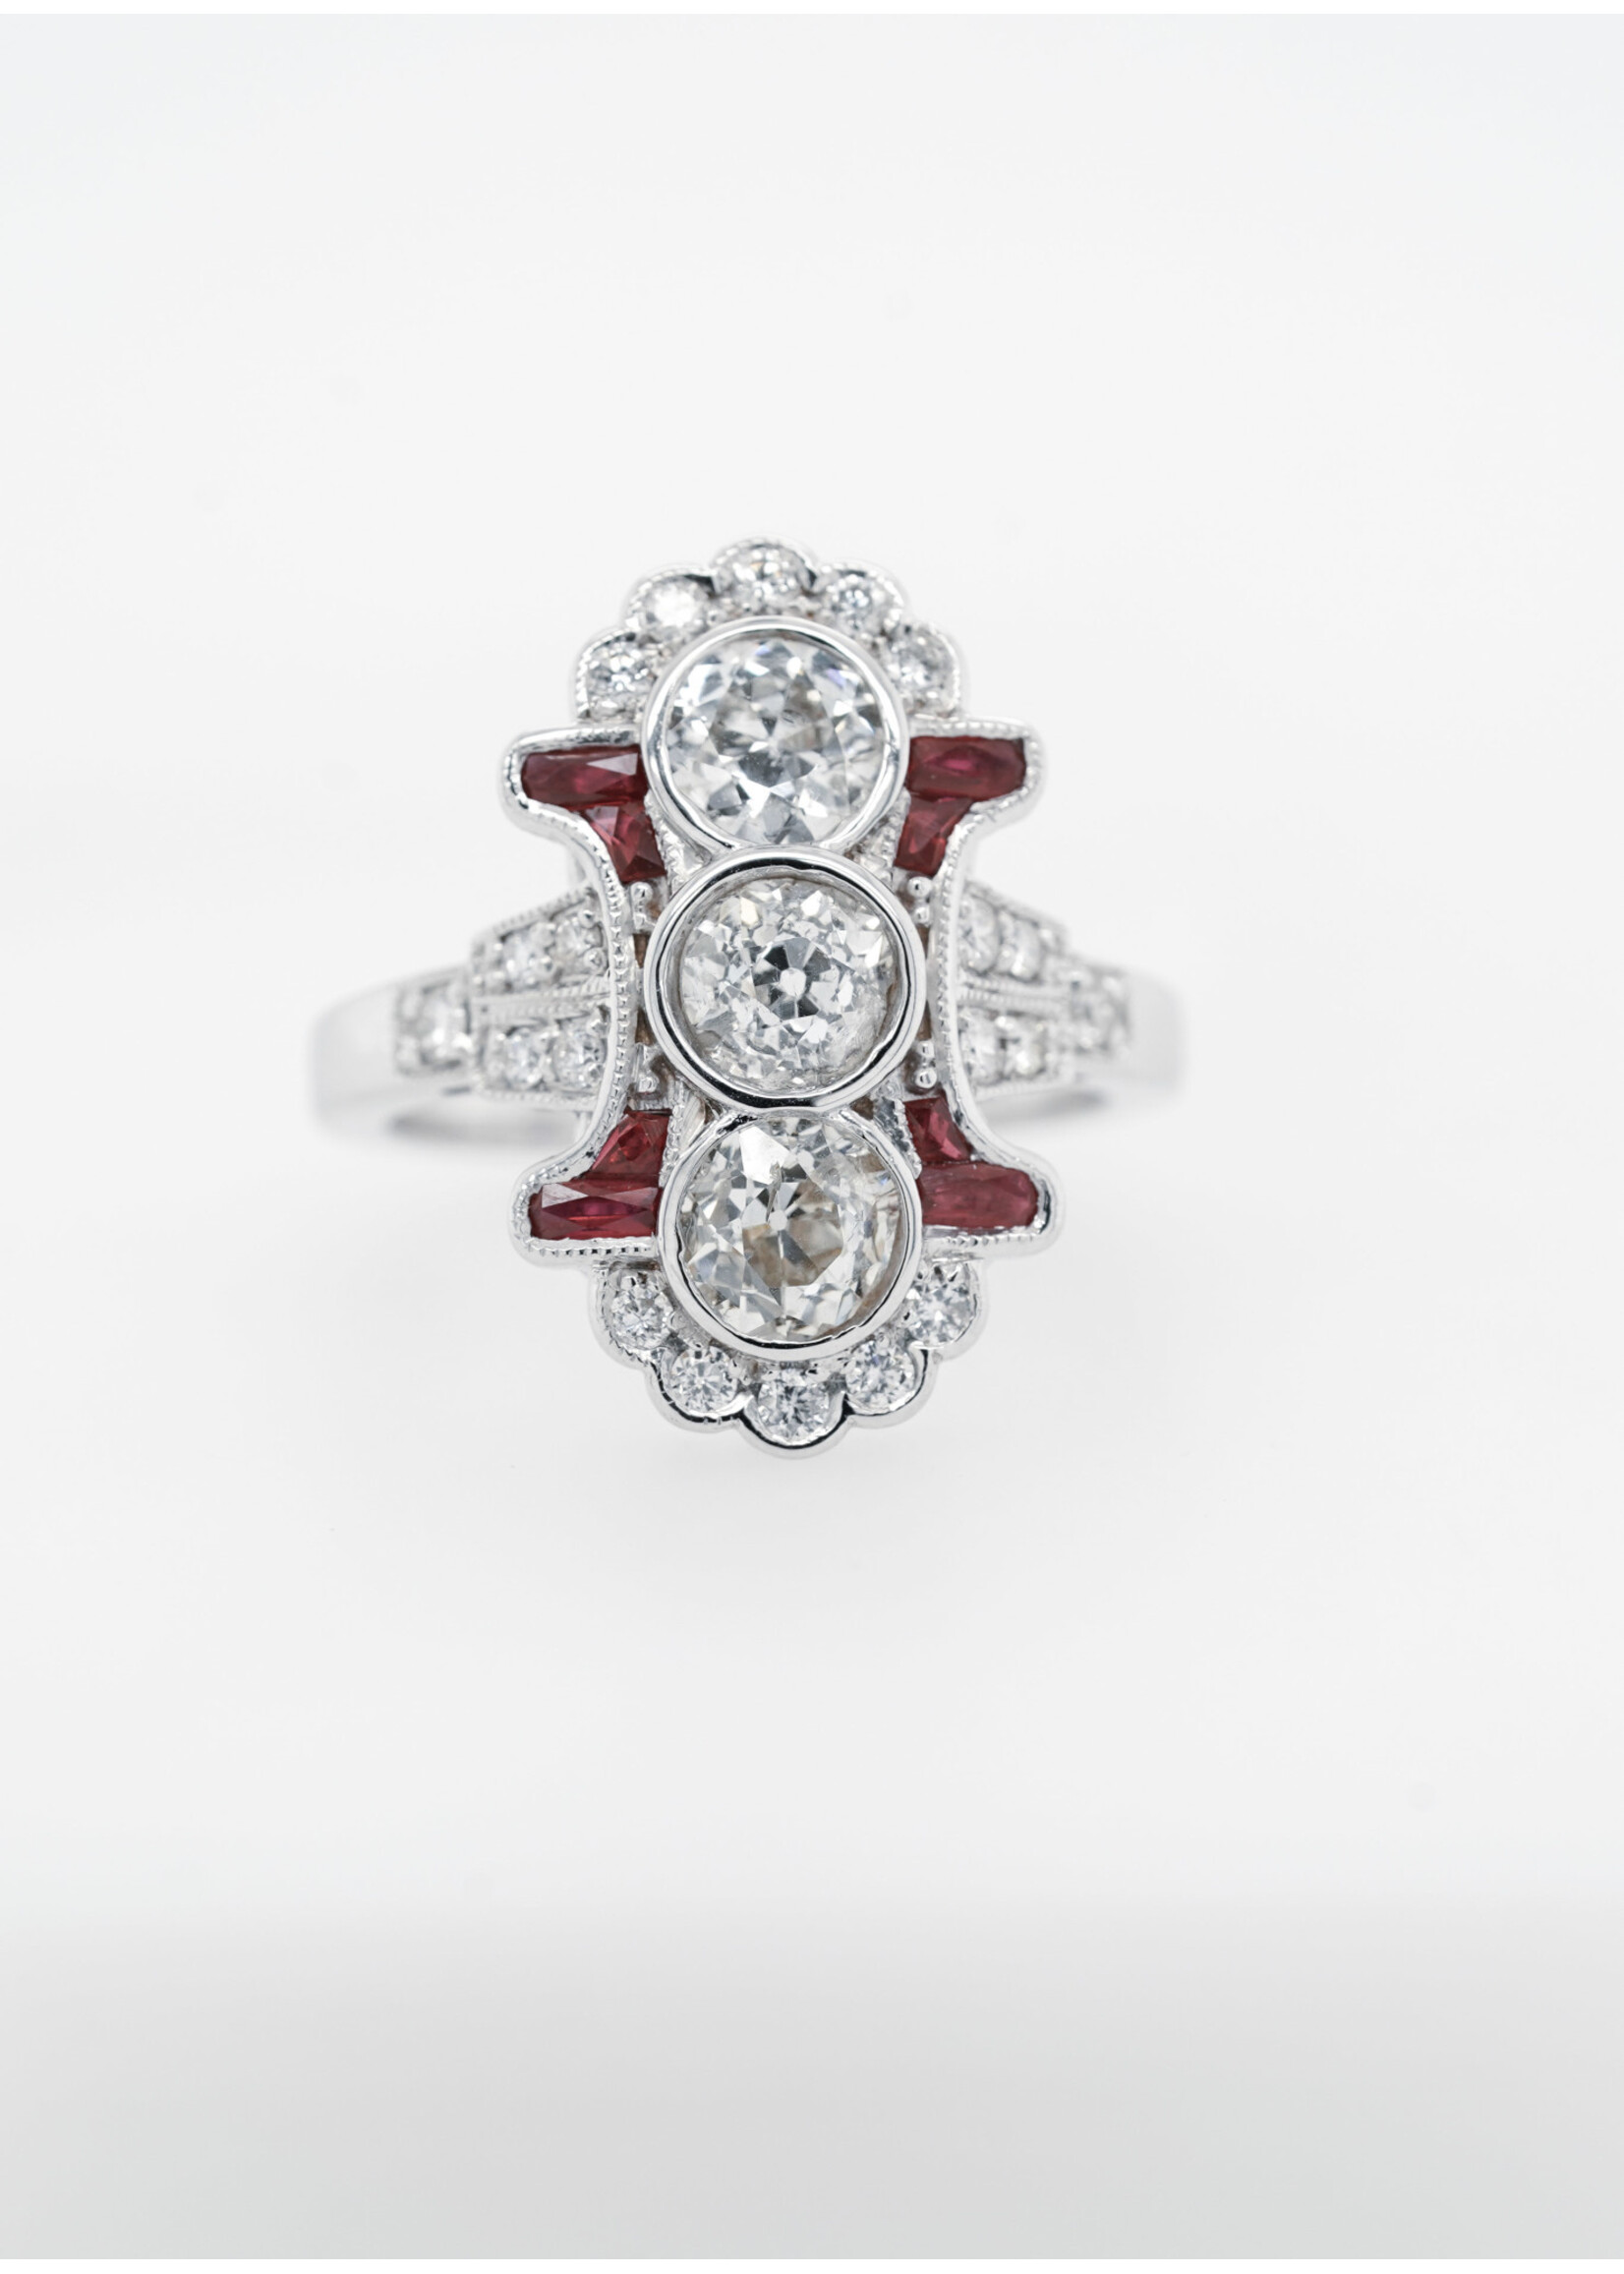 18KW 7.1g 2.1ctw Diamond .40ctw Ruby Vintage Inspired Ring (size 7)